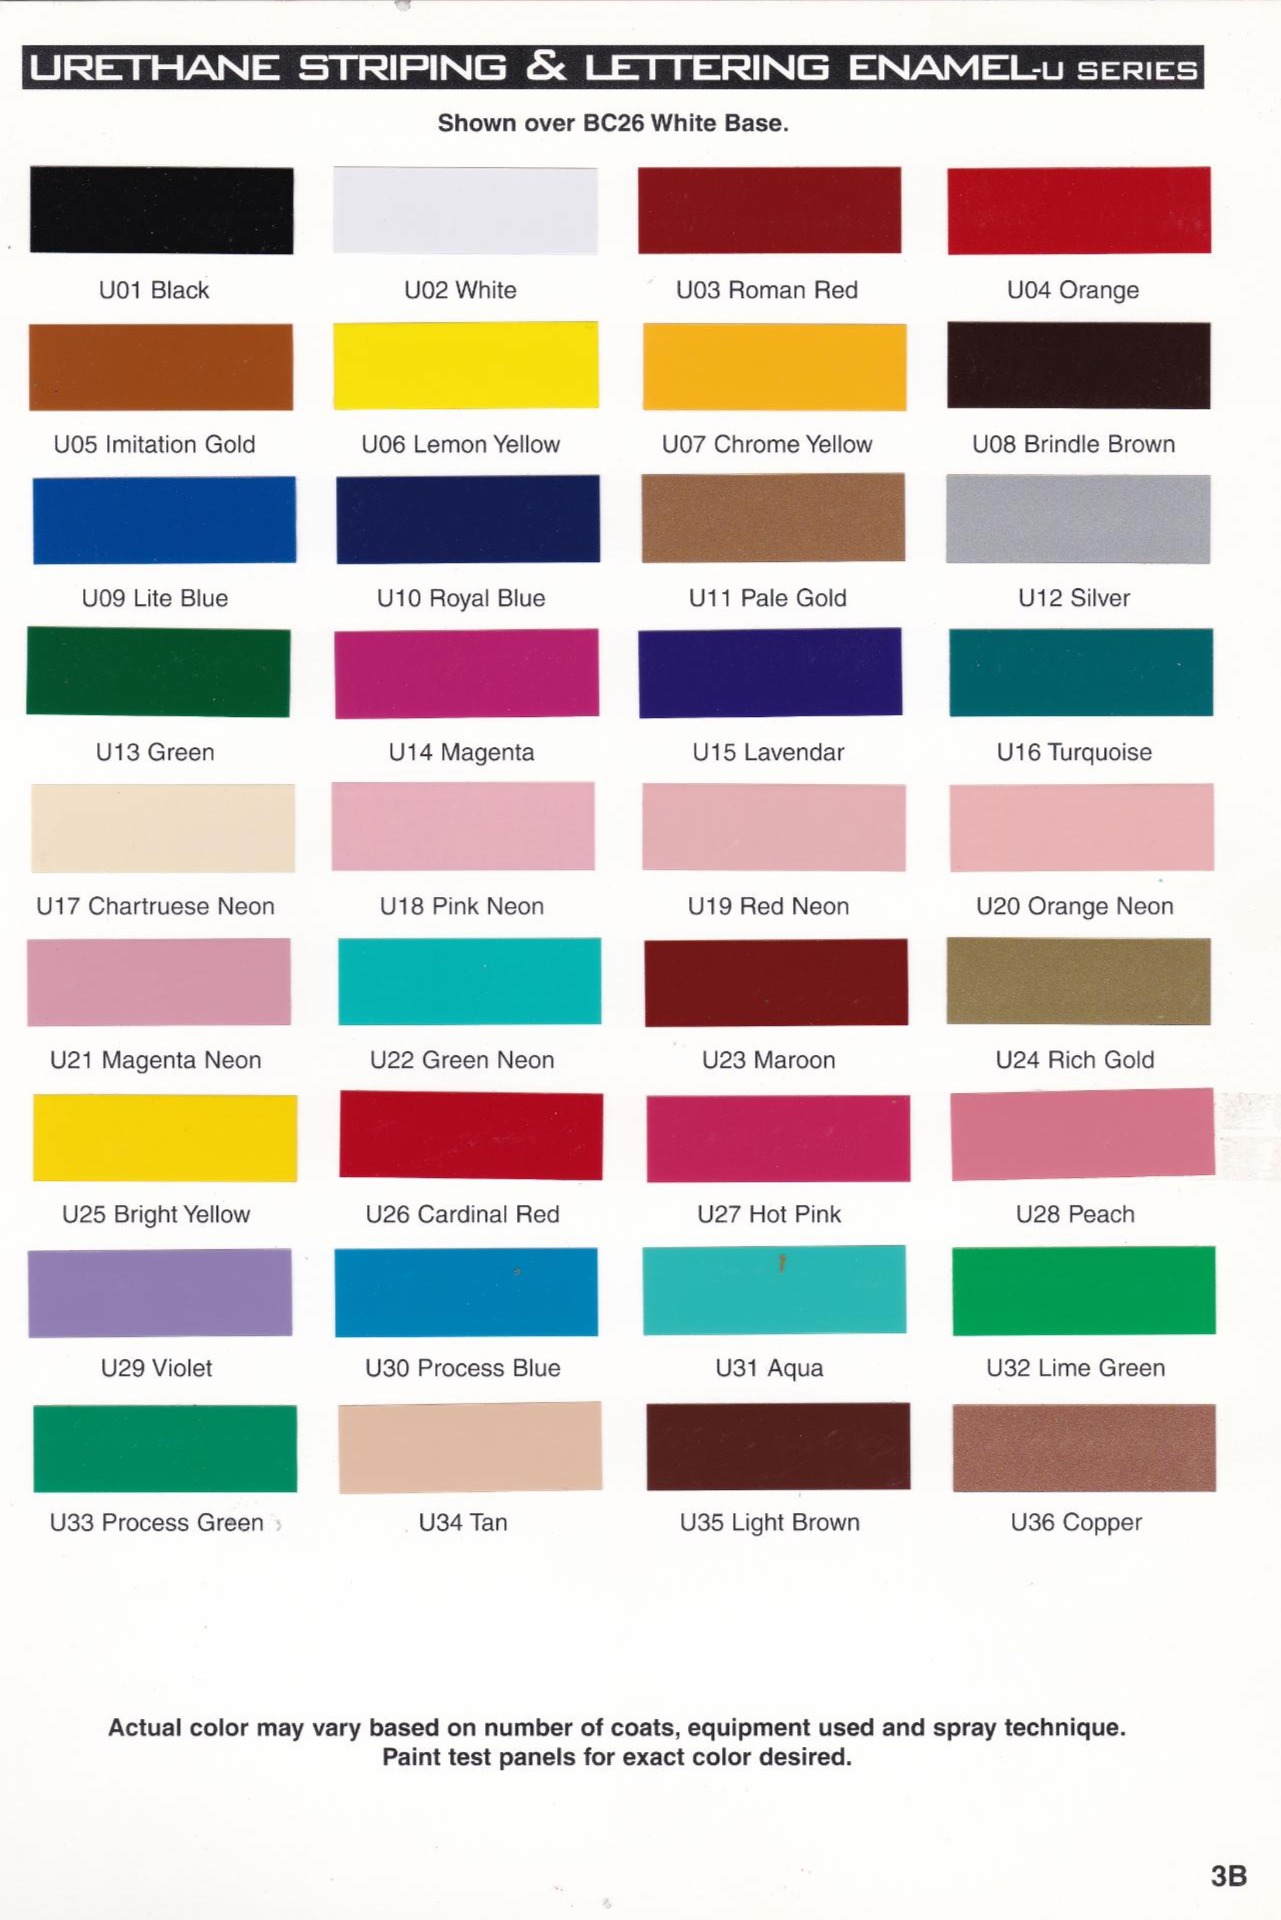 House Of Kolor Paint Chart Book